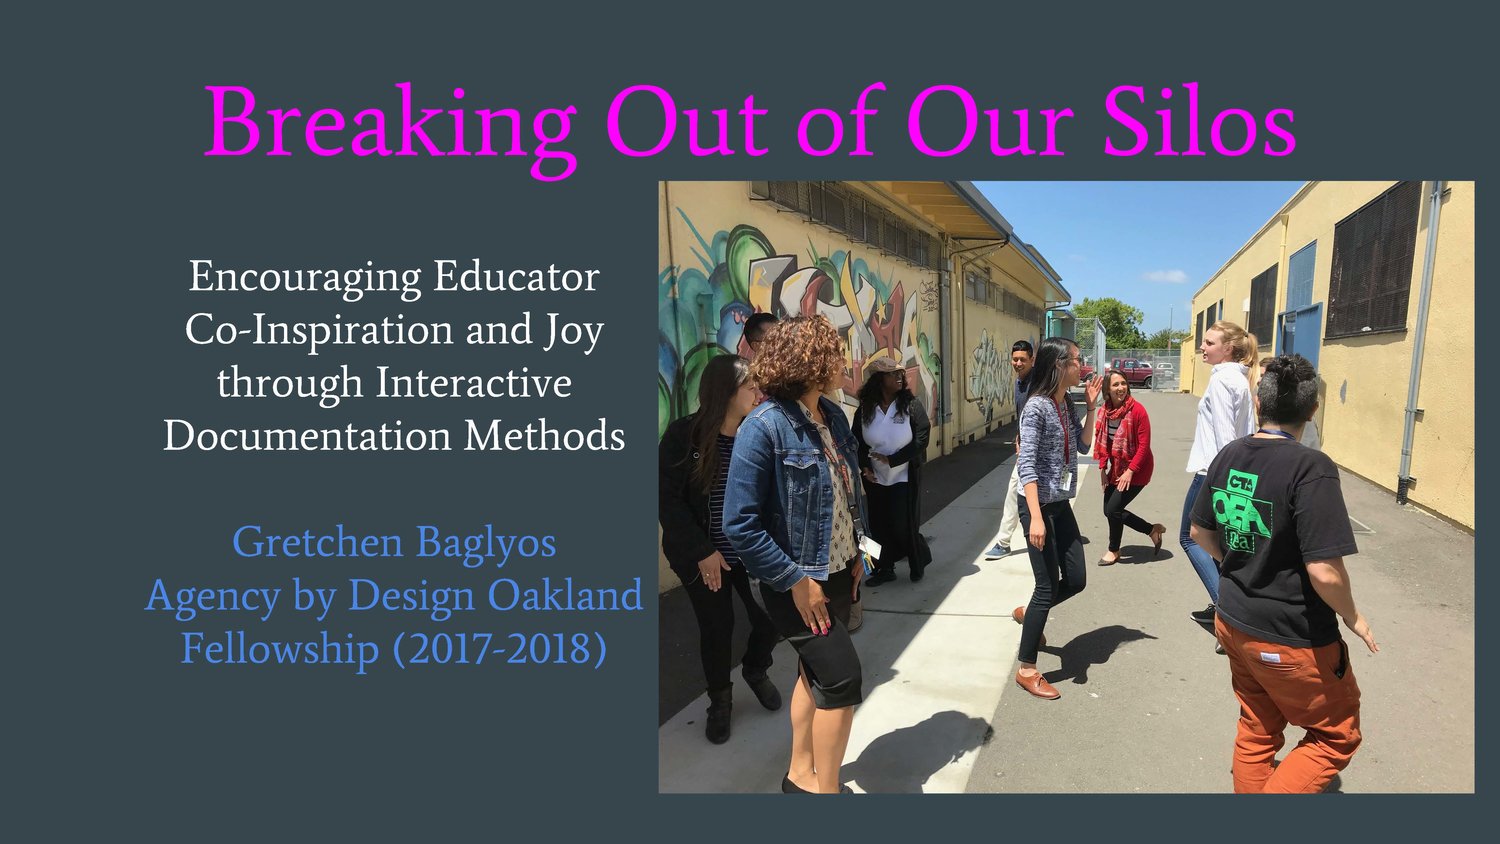 BREAKING OUT OF OUR SILOS: ENCOURAGING EDUCATOR CO-INSPIRATION AND JOY THROUGH INTERACTIVE DOCUMENTATION METHODSBy Gretchen Baglyos, 2017-2018 Teaching Fellow, Arts Integration Specialist &amp; Choir Teacher, Alliance Academy, Oakland